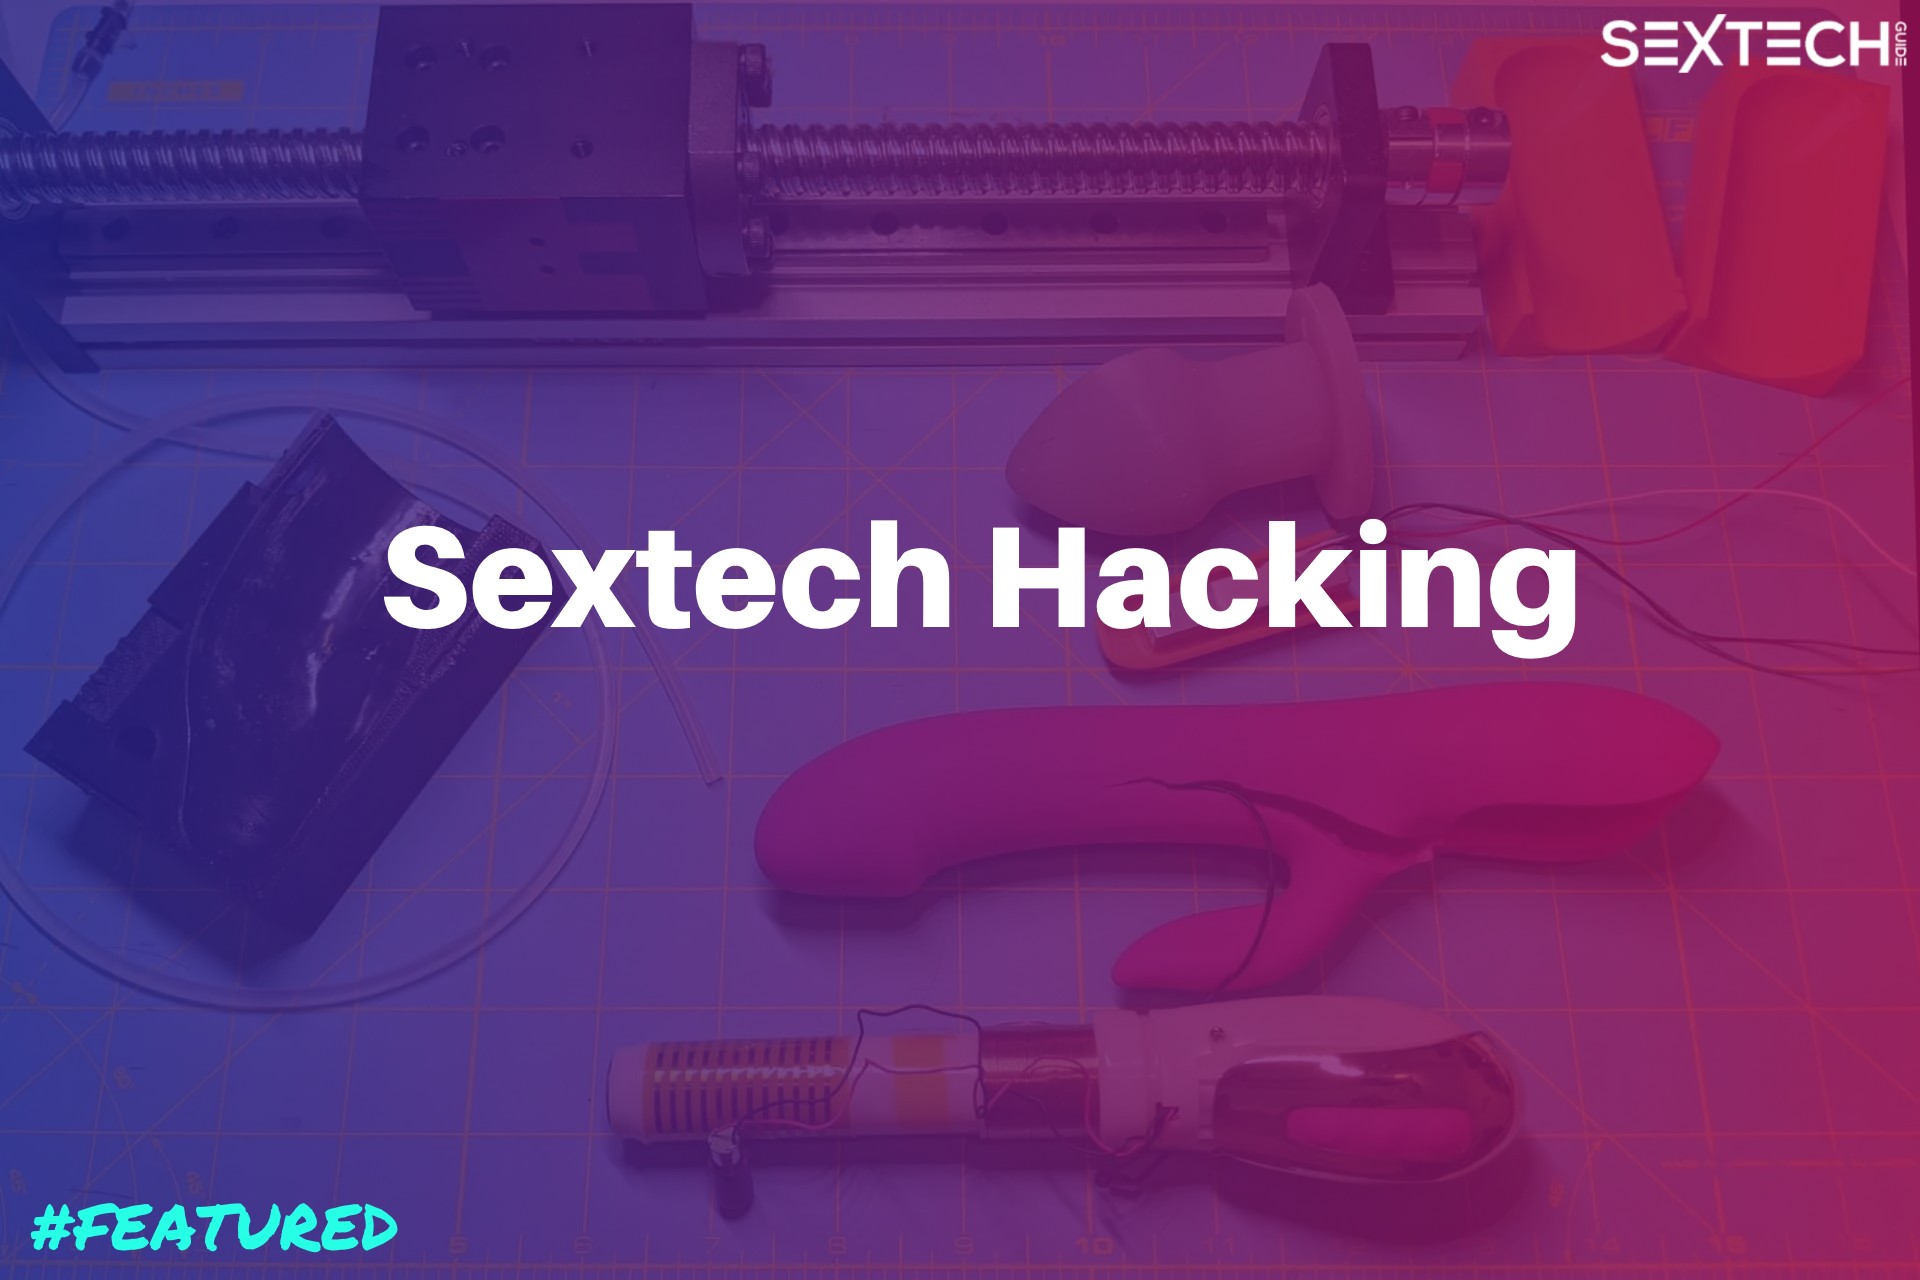 How to get started with sextech hacking